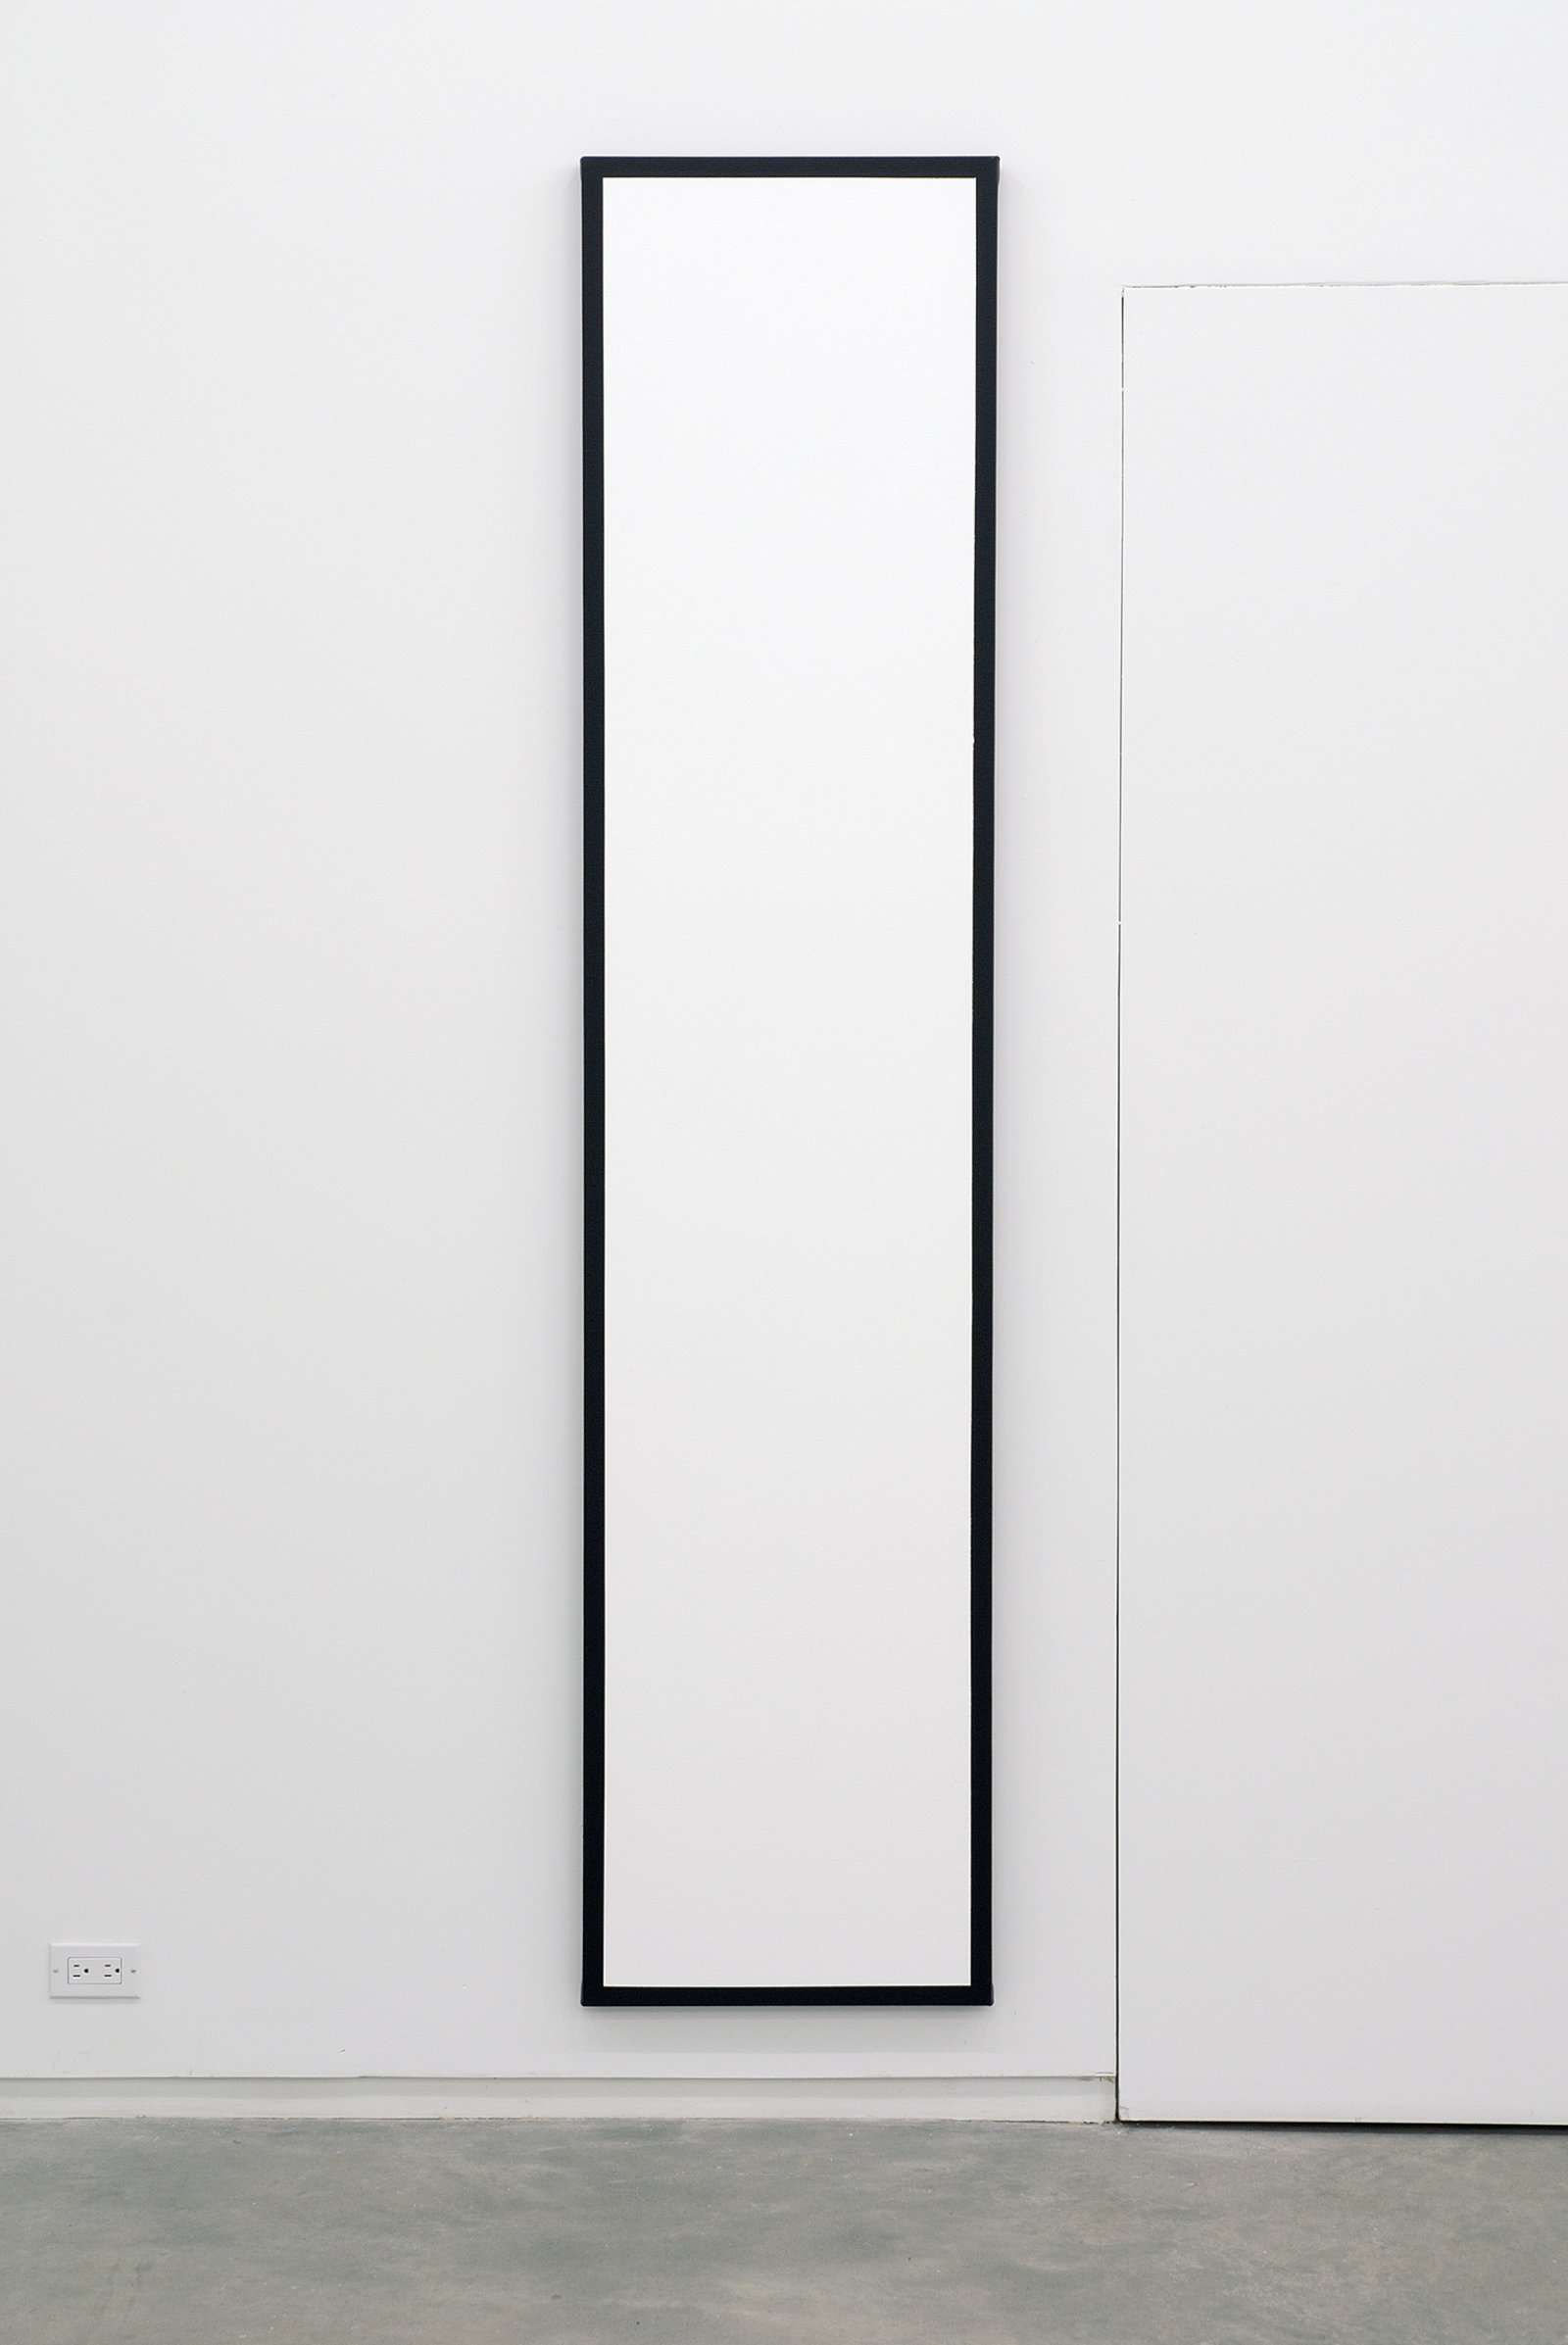 Ian Wallace, Untitled (White Monochrome with Black), 1967–2007, acrylic on canvas, 90 x 20 in. (229 x 51 cm)